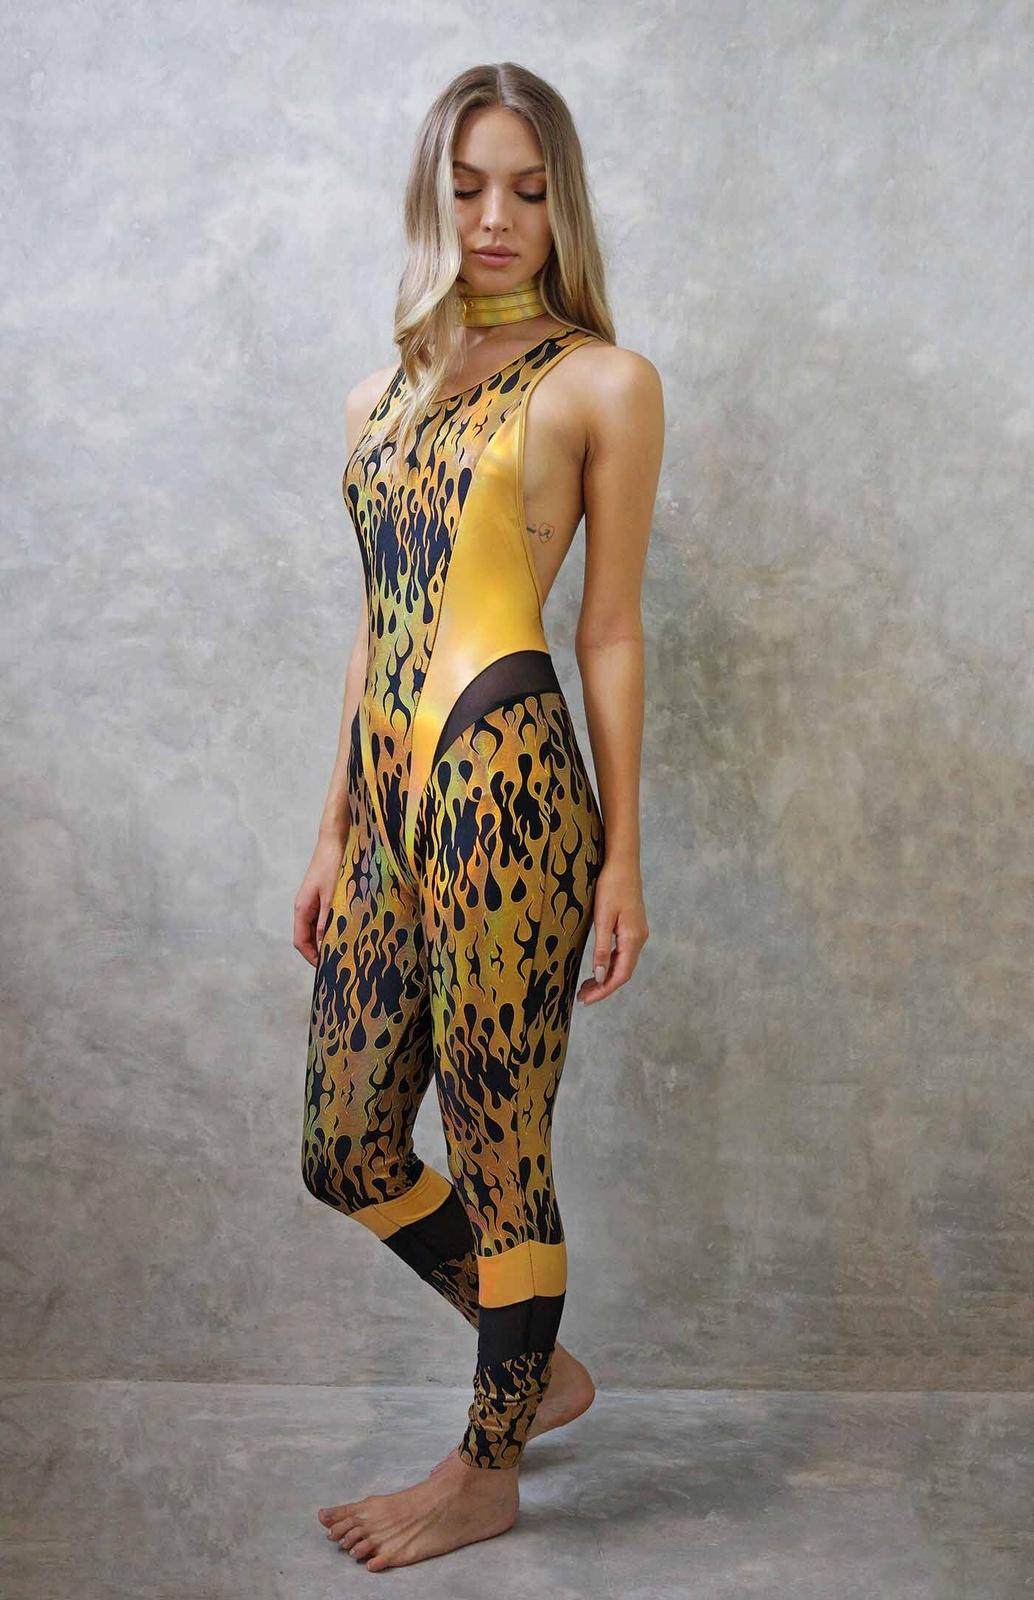 Womens black and gold bodysuit flame rave outfit from Love Khaos festival clothing brand.